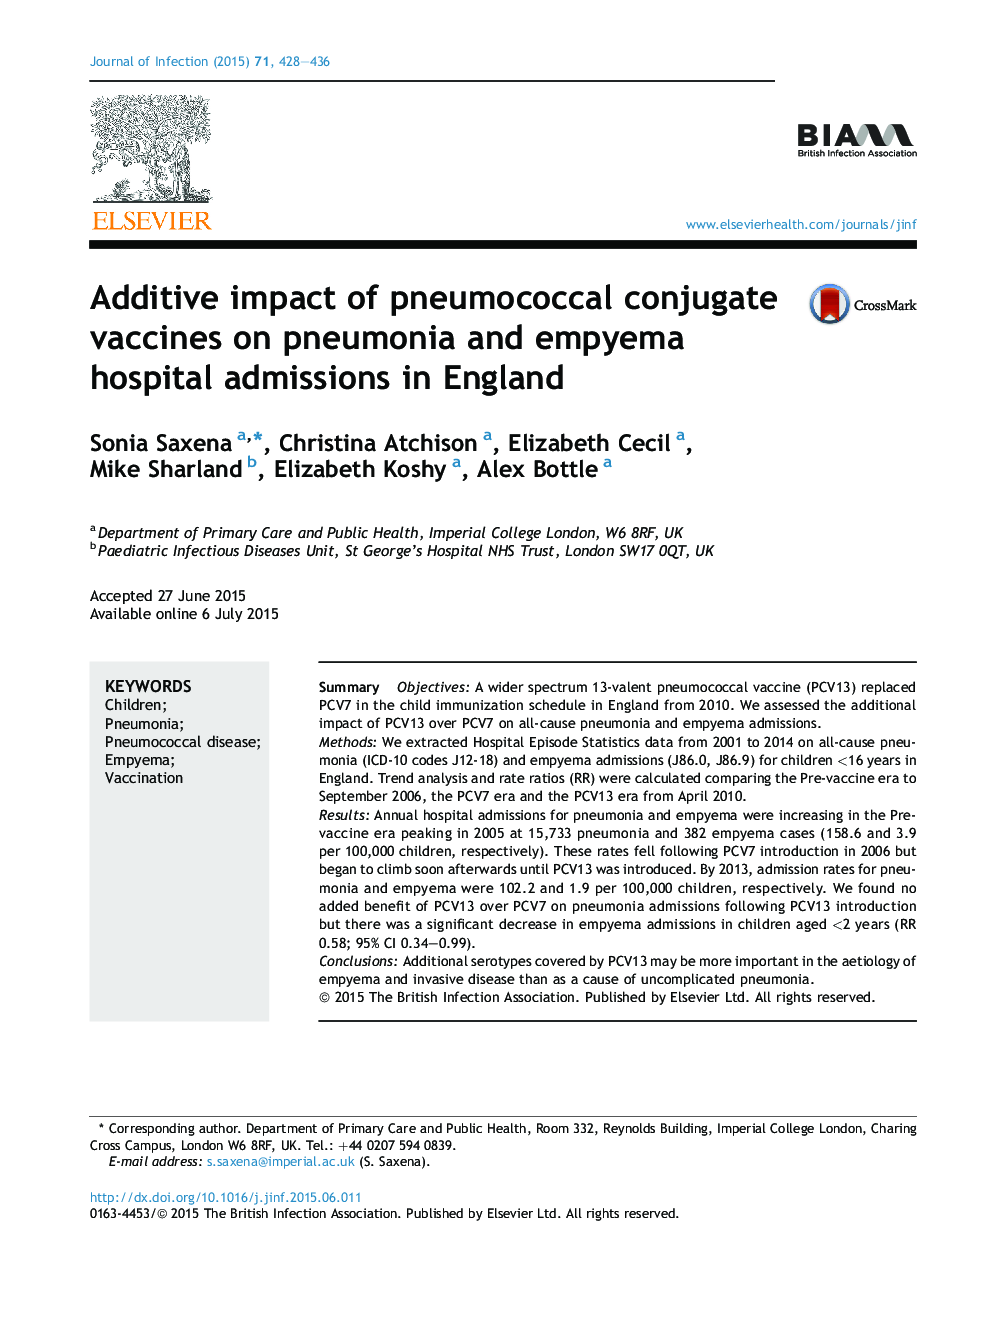 Additive impact of pneumococcal conjugate vaccines on pneumonia and empyema hospital admissions in England